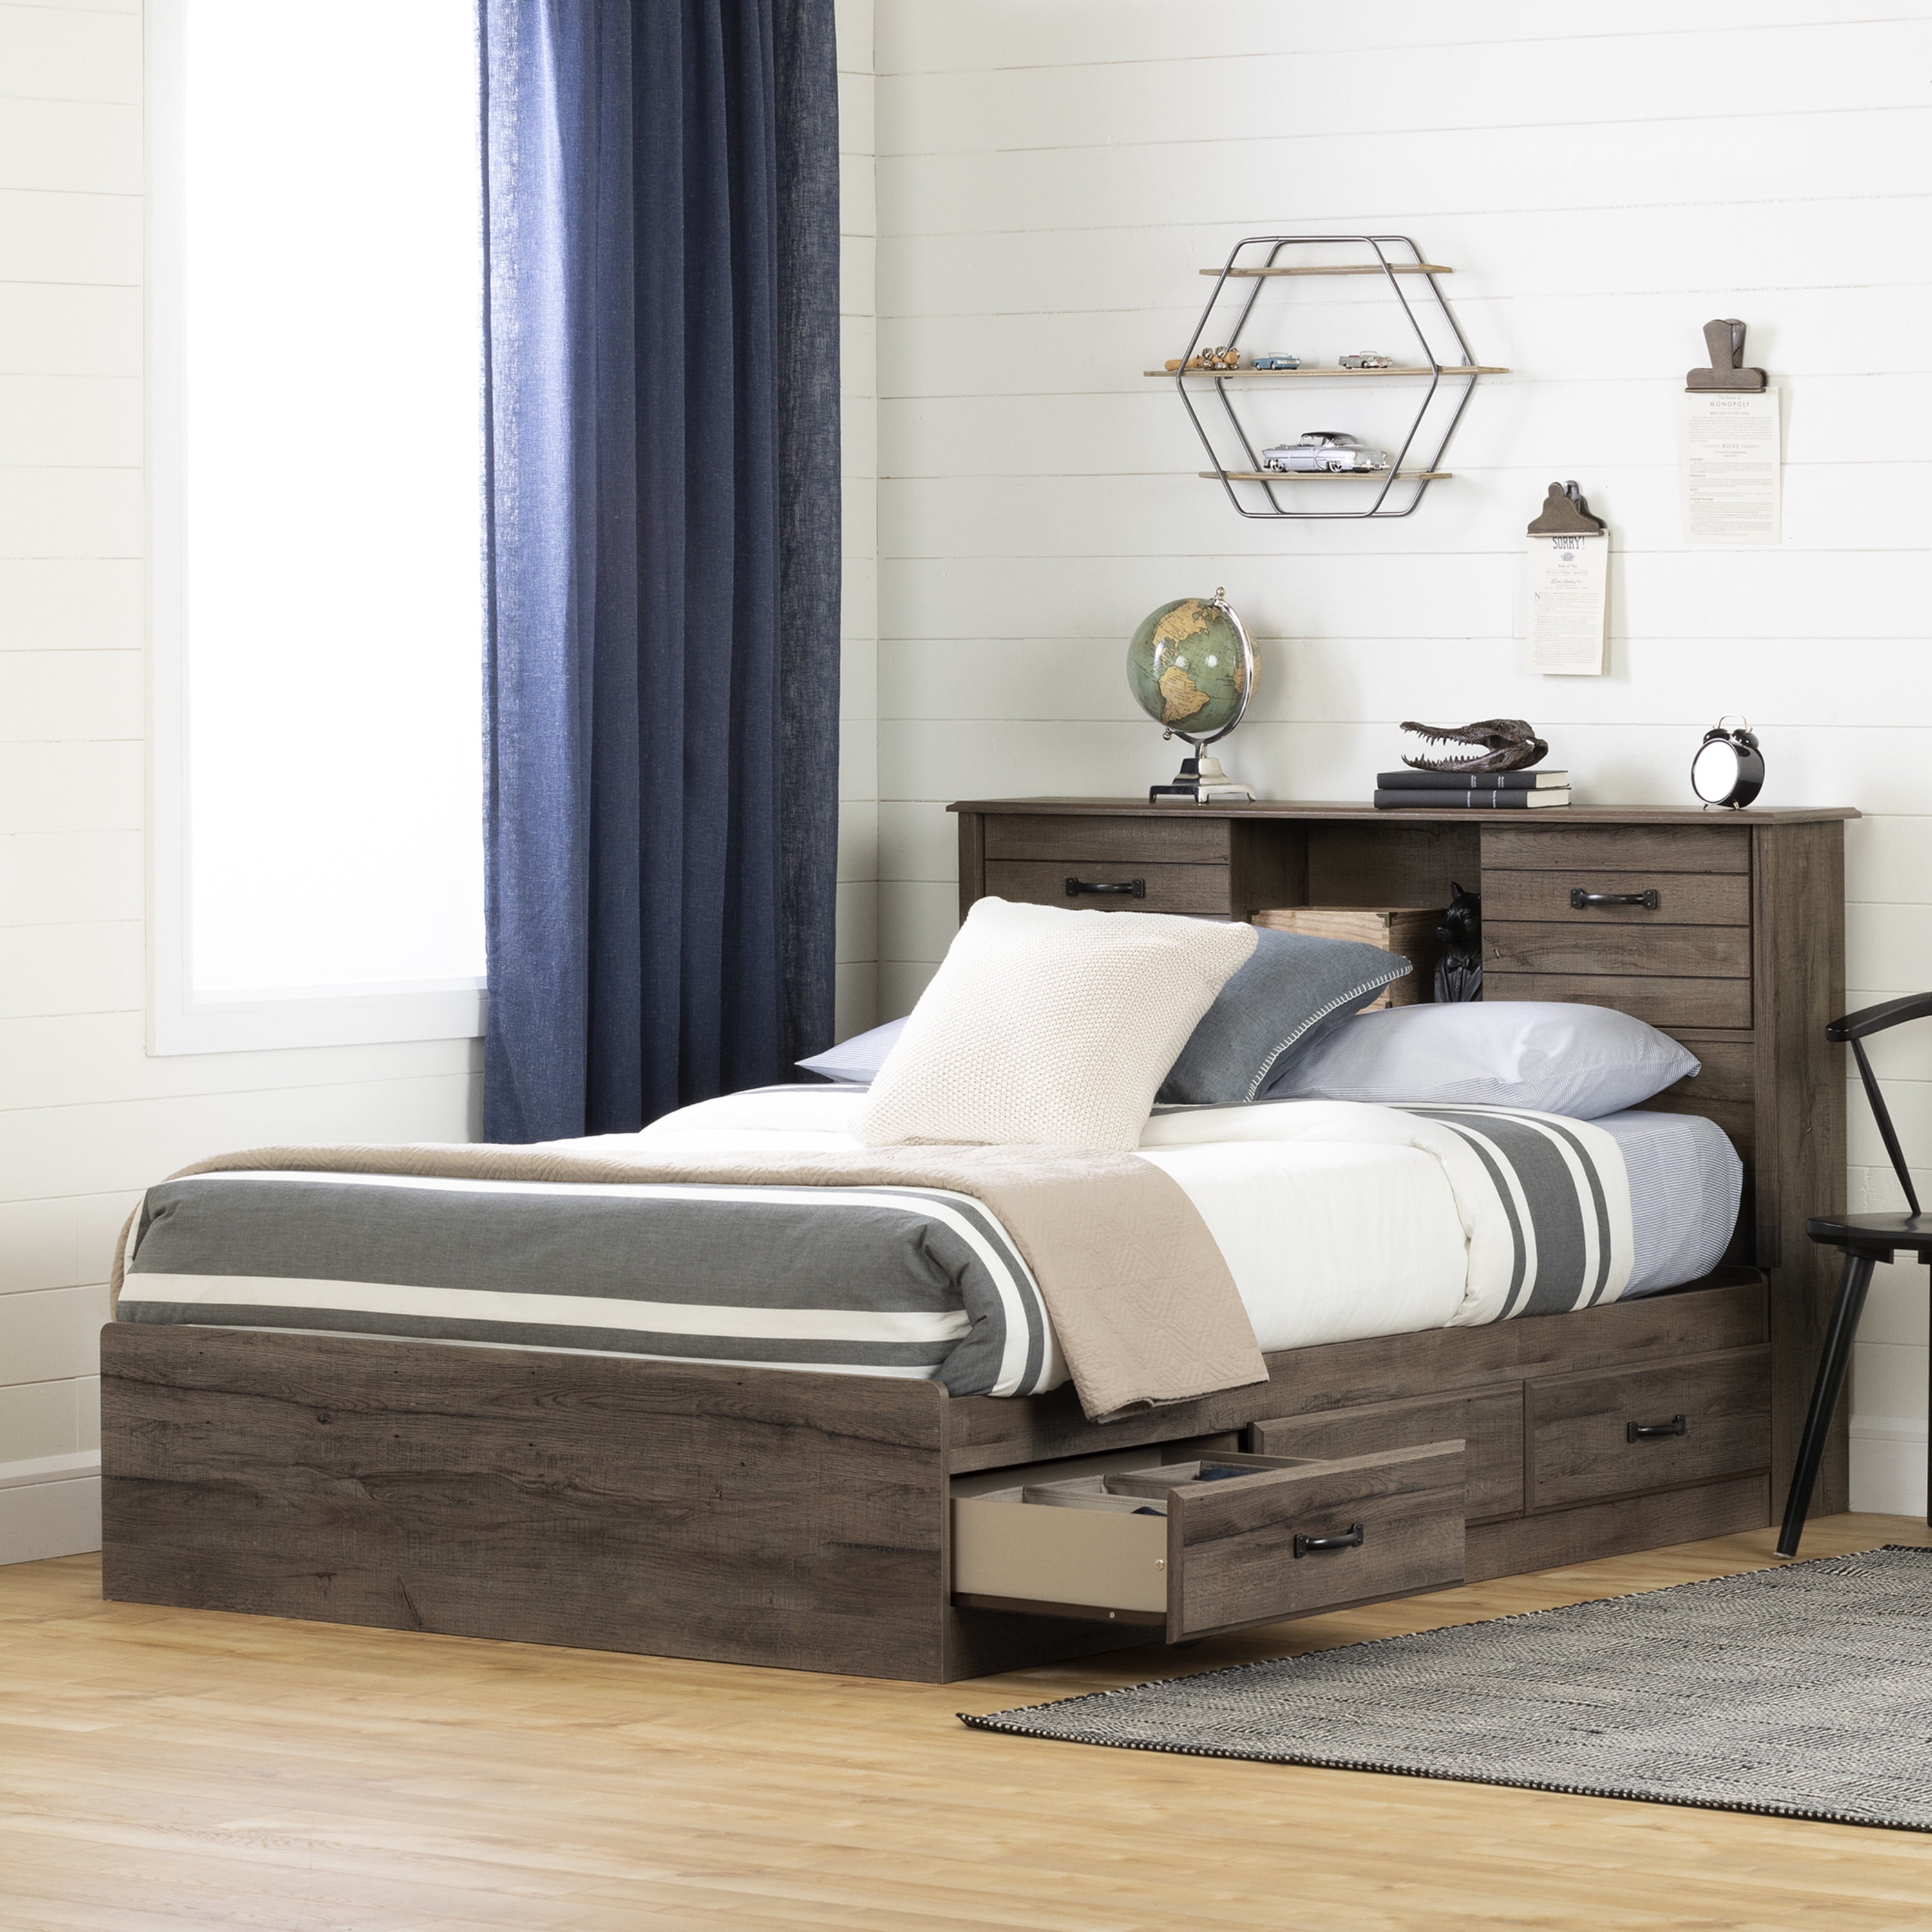 South Shore Ulysses Full Traditional Bed And Headboard Set Fall Oak